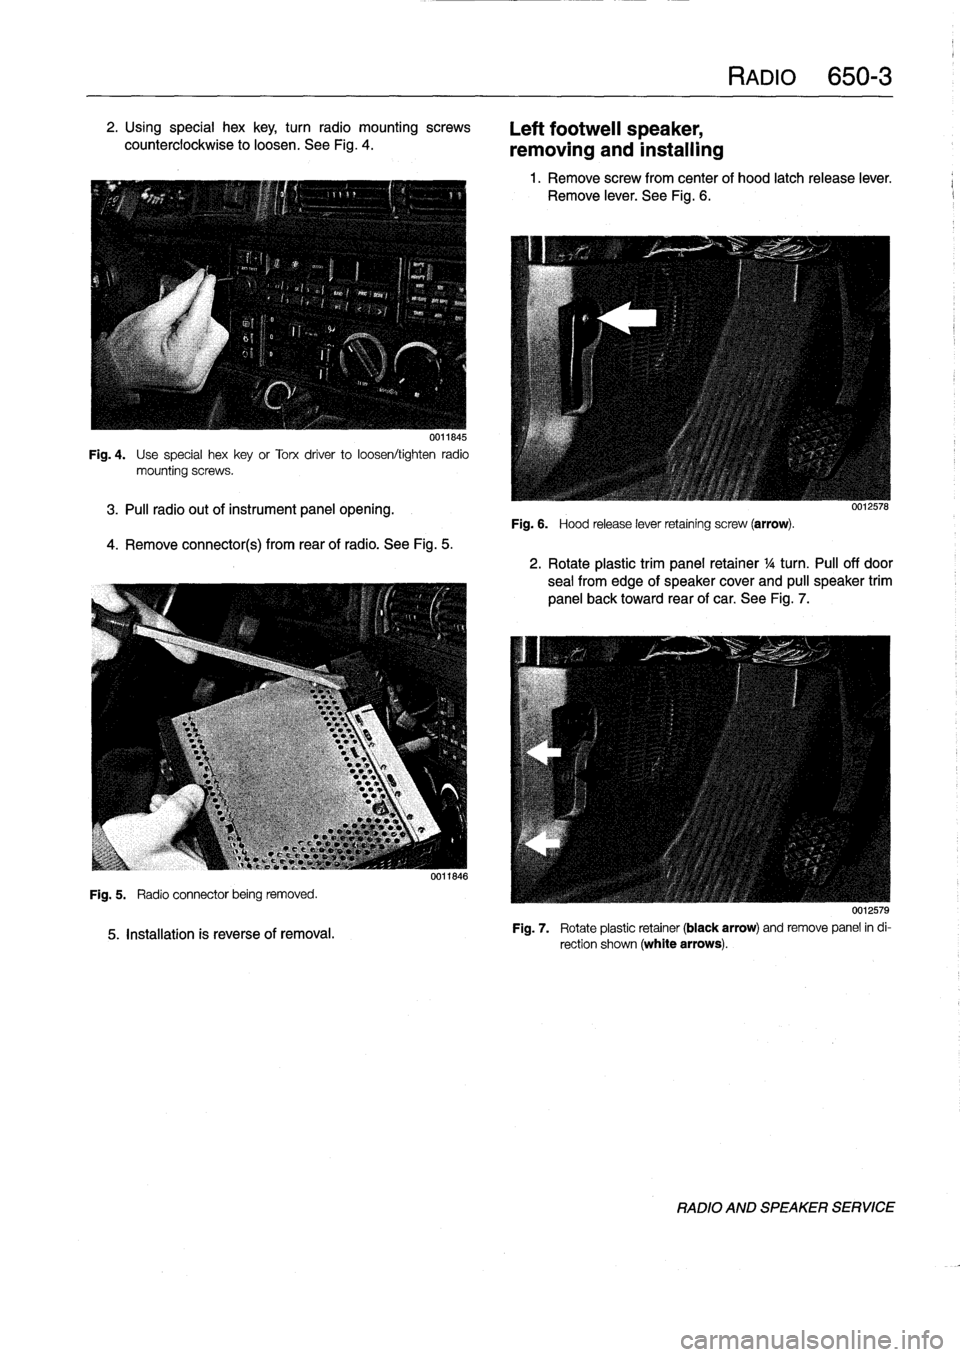 BMW M3 1993 E36 User Guide 2
.
Using
special
hex
key,
turn
radio
mountingscrews

counterclockwise
to
loosen
.
See
Fig
.
4
.

0011845

Fig
.
4
.

	

Use
special
hexkey
or
Torx
driver
to
loosen/tighten
radio
mountingscrews
.

3
.